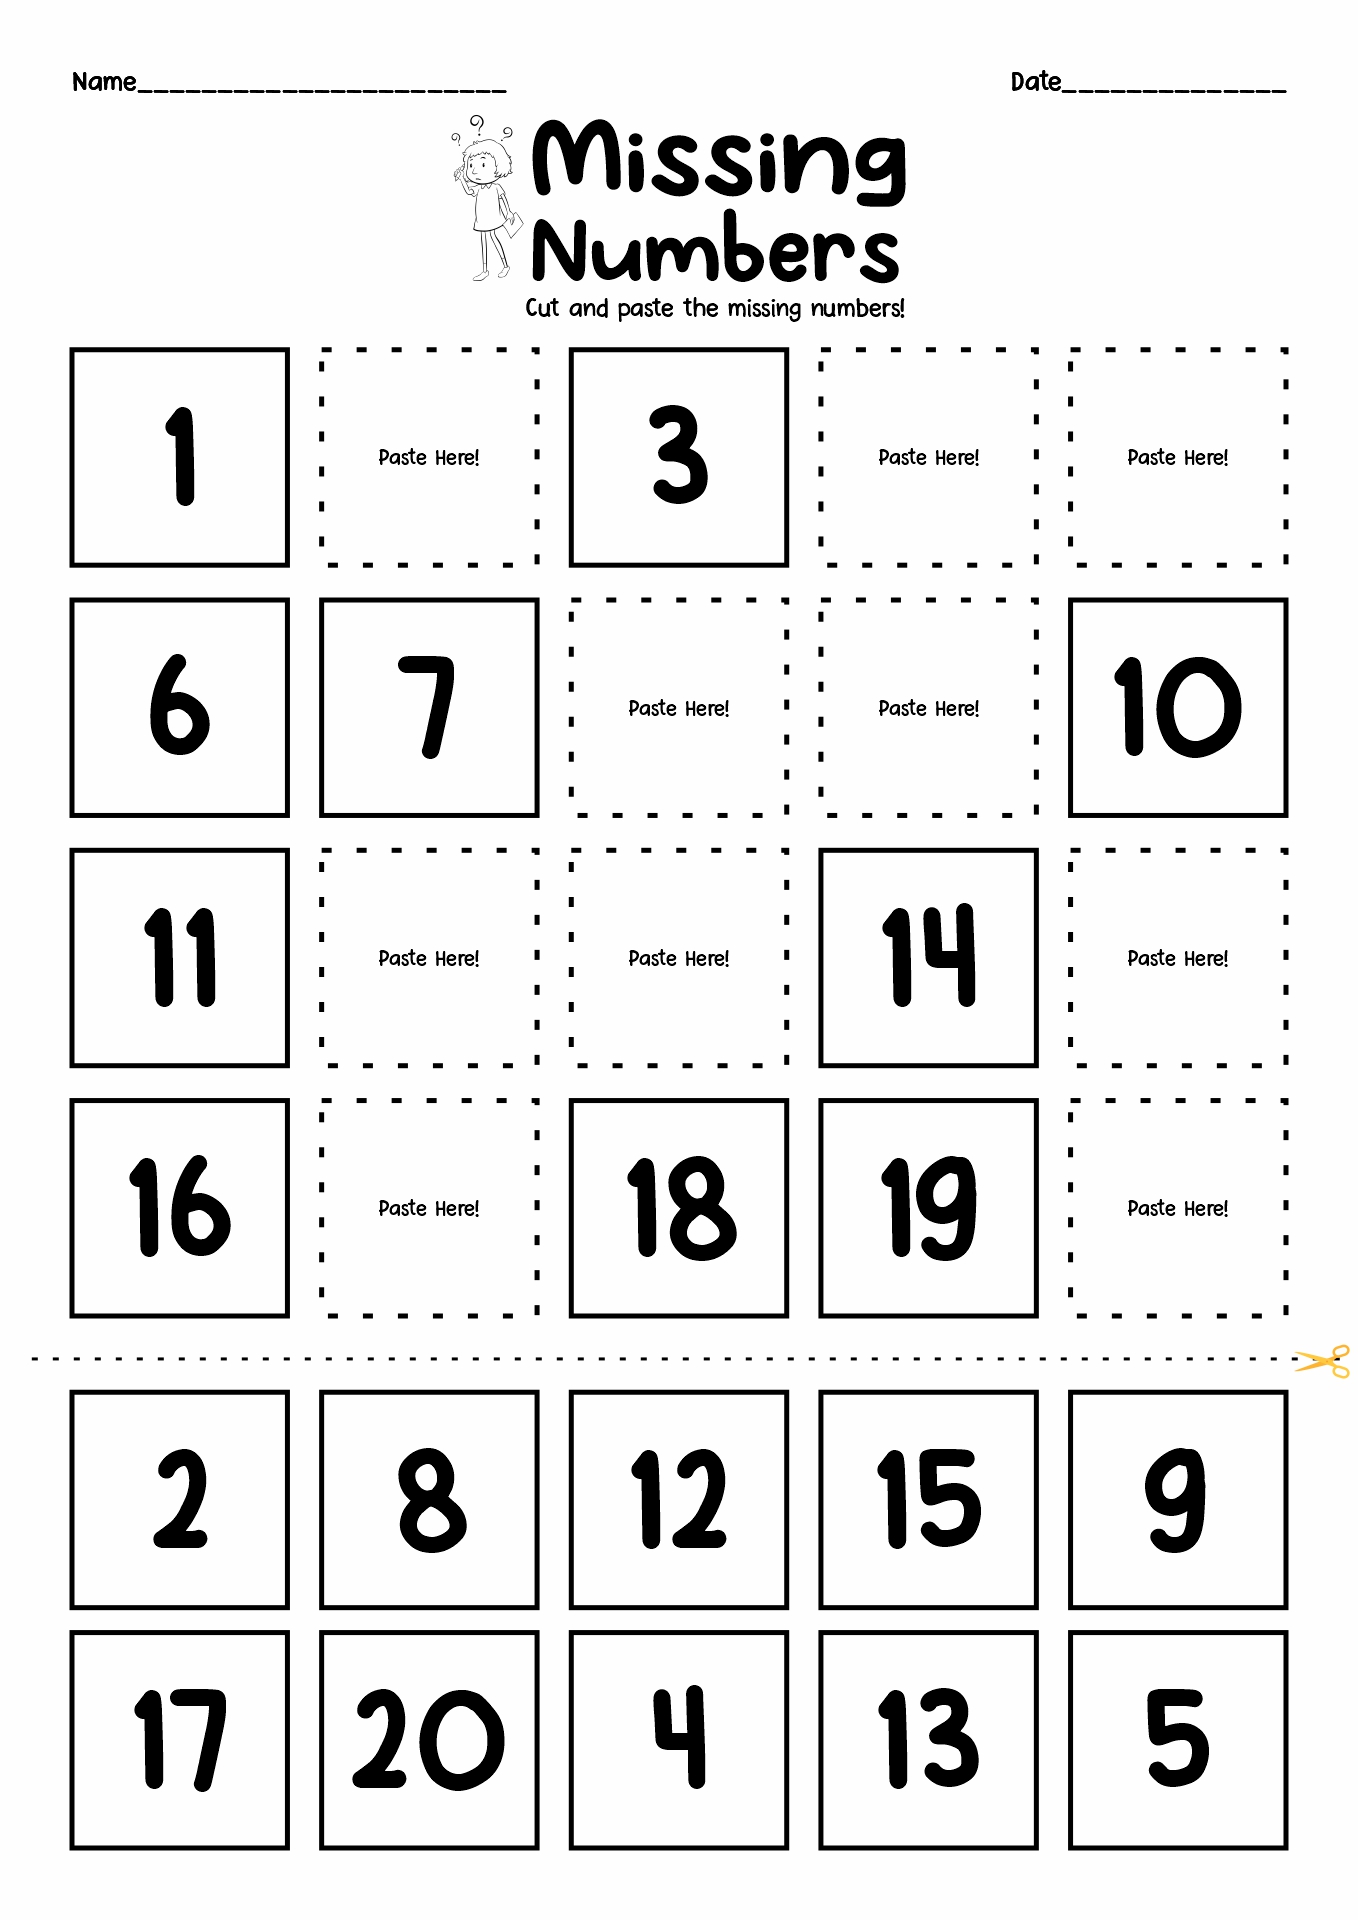 cut-and-paste-free-printable-worksheets-printable-templates